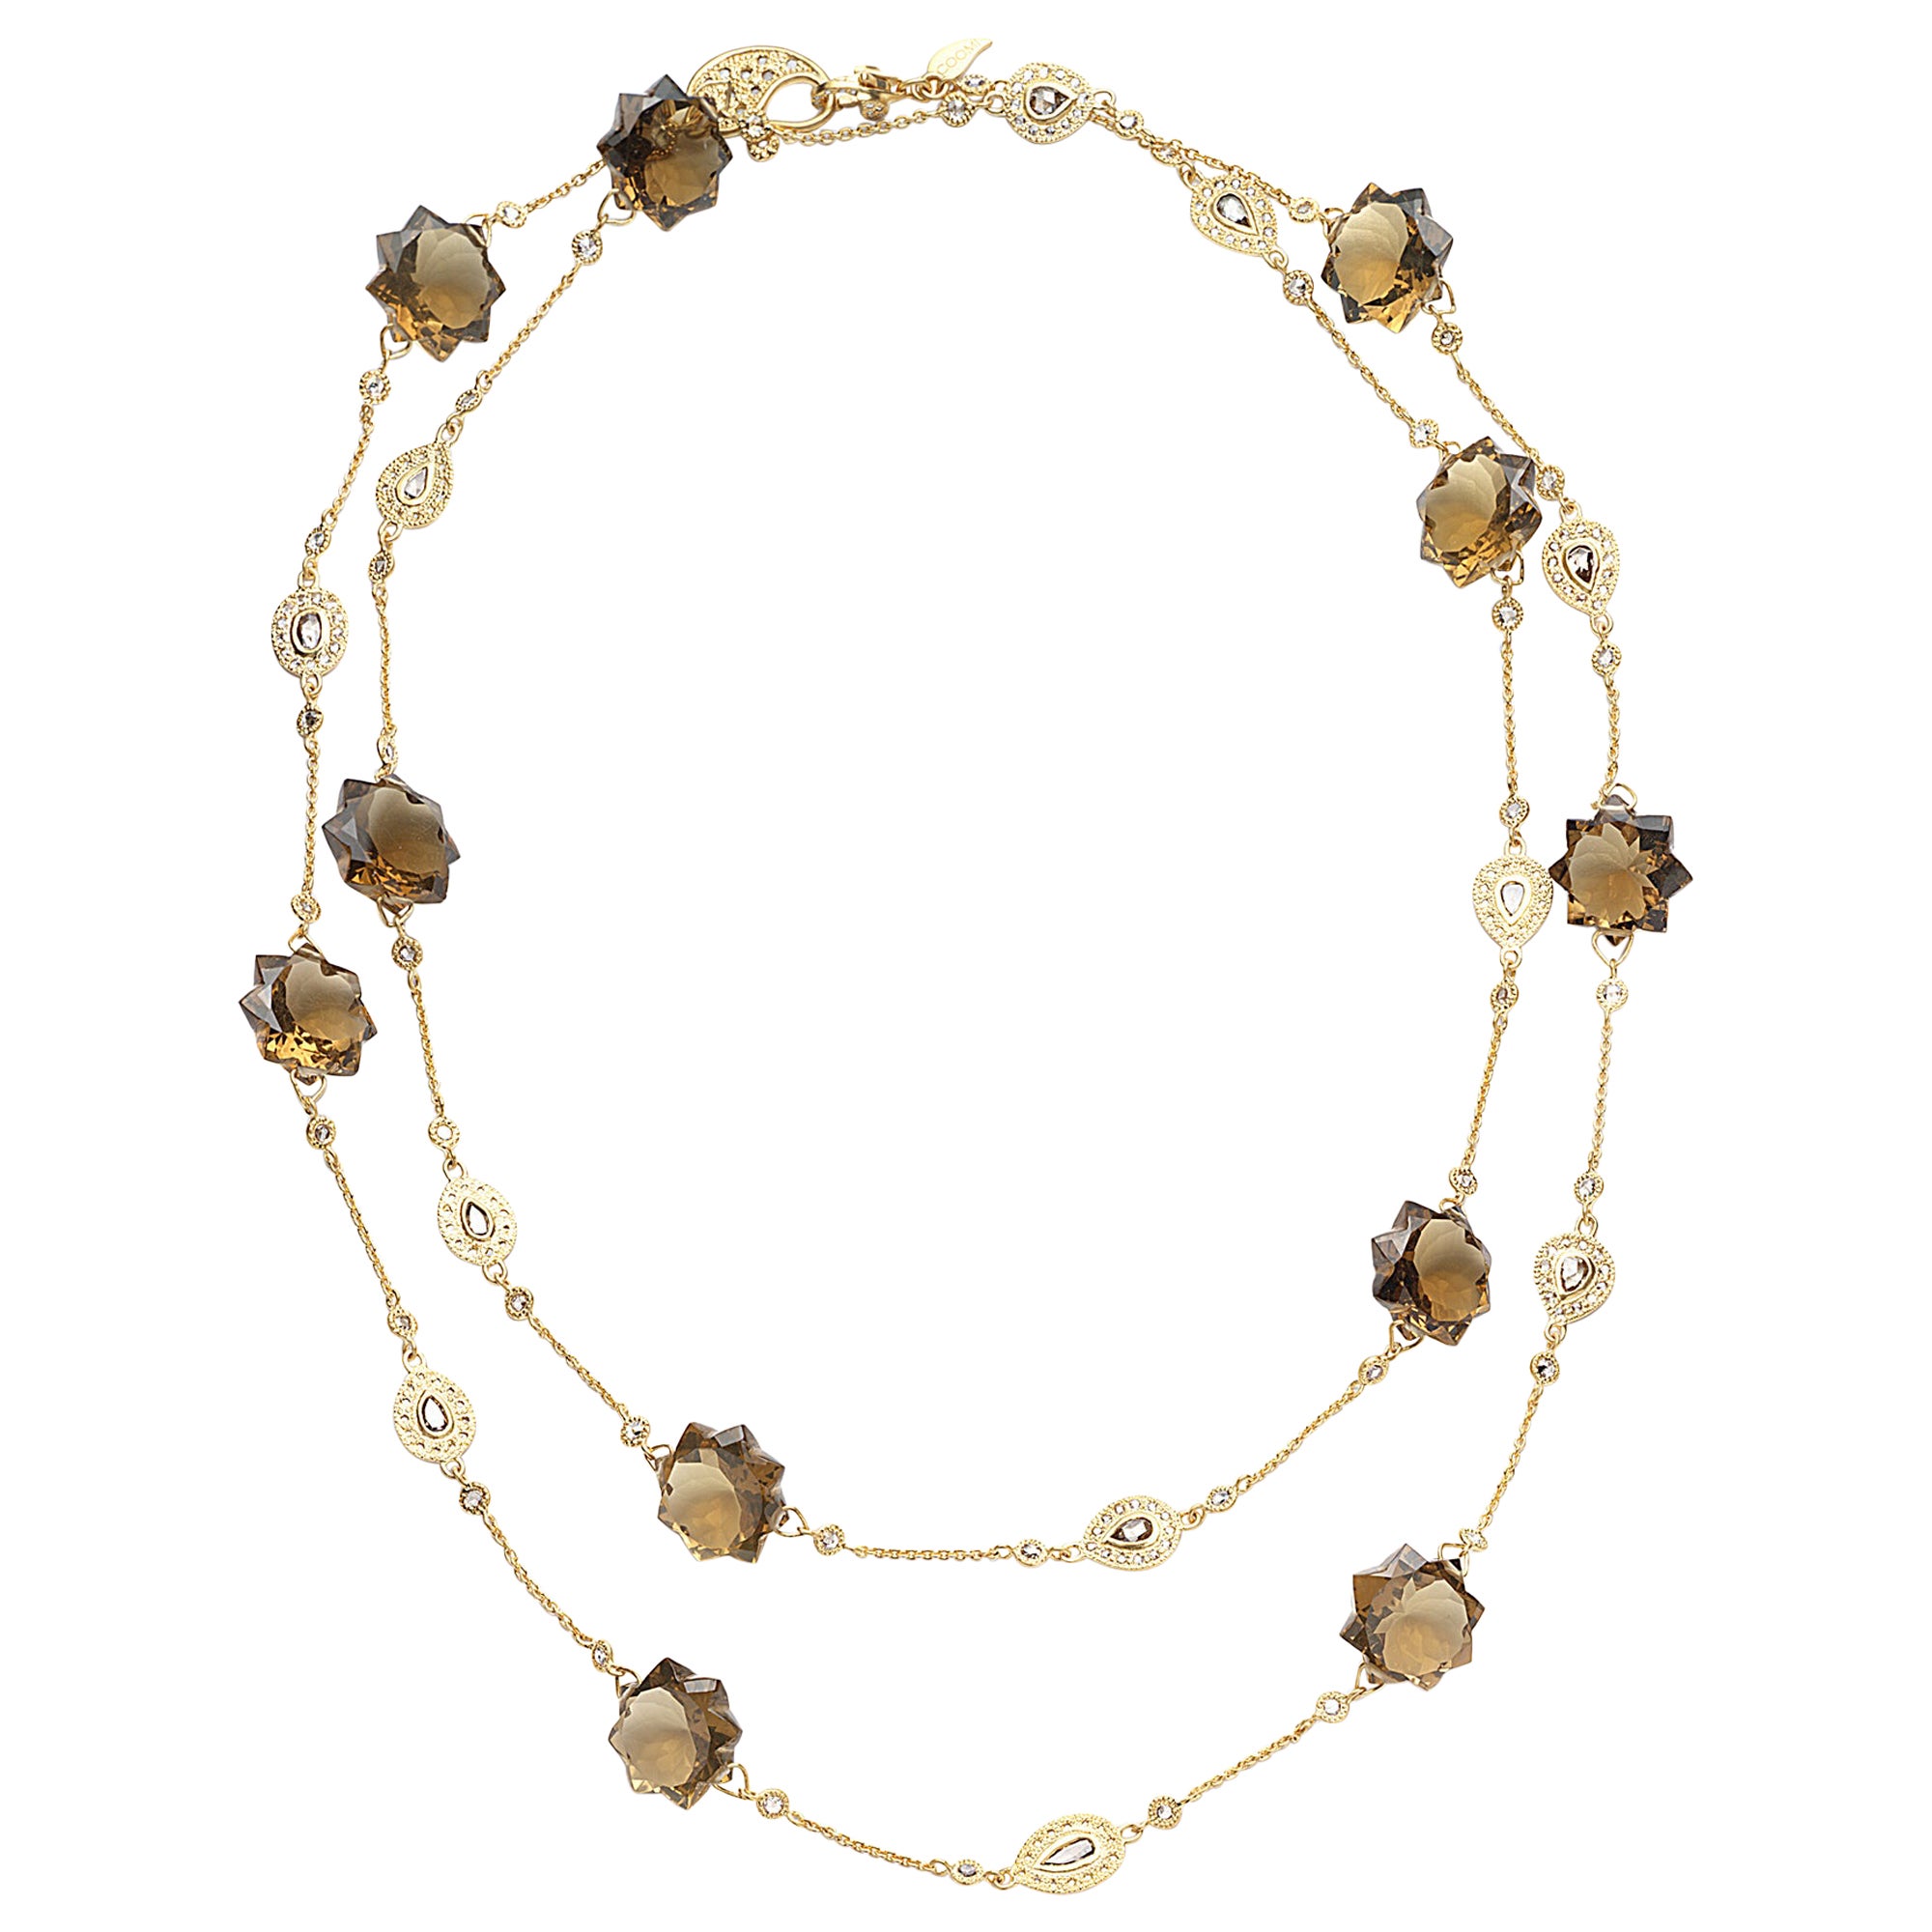 Long Starburst Necklace in 20K Yellow Gold with Cognac Quartz and Diamonds